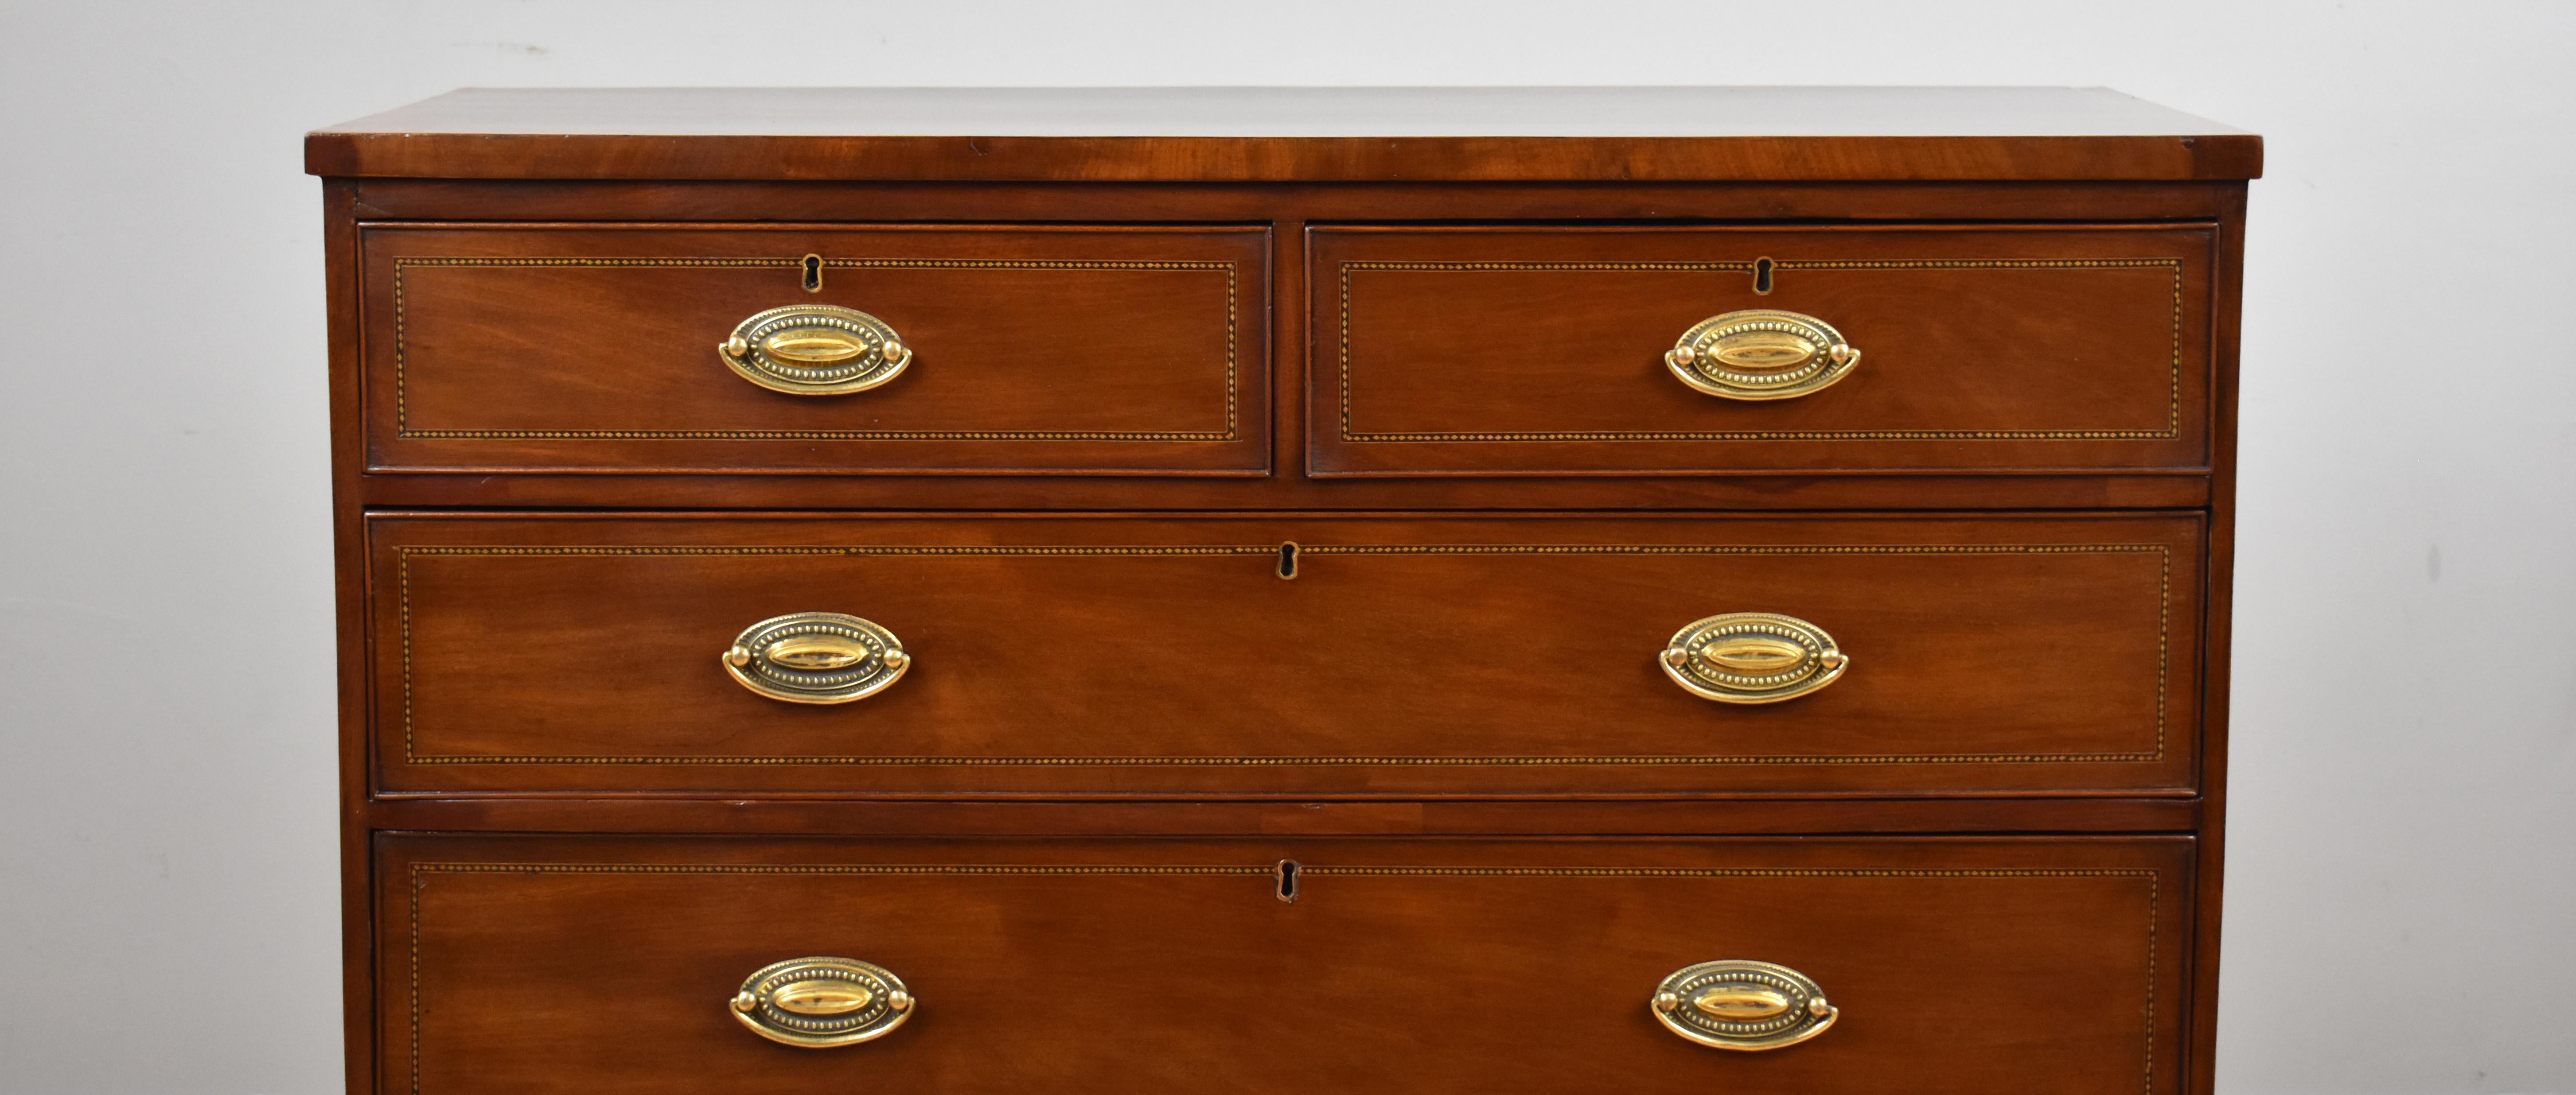 George III 19th Century English Antique Mahogany and Inlaid Chest of Drawers